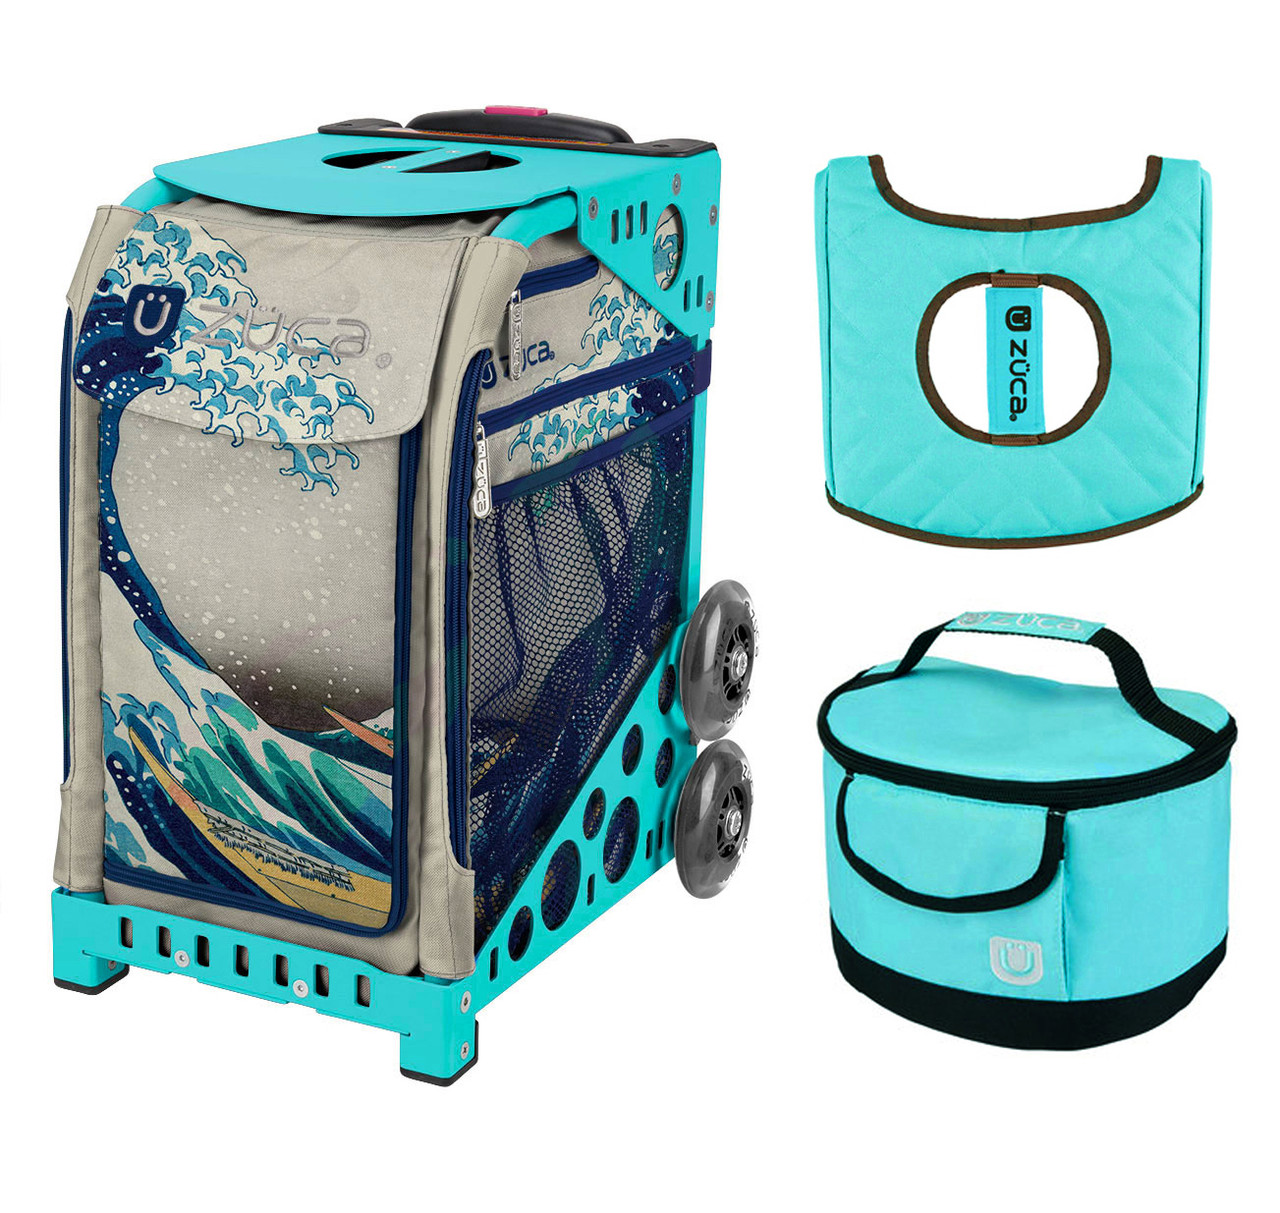 Zuca Sport Bag Reef with Gift Turquoise/Brown Seat Cover and Turquoise Lunchbox Turquoise Frame 